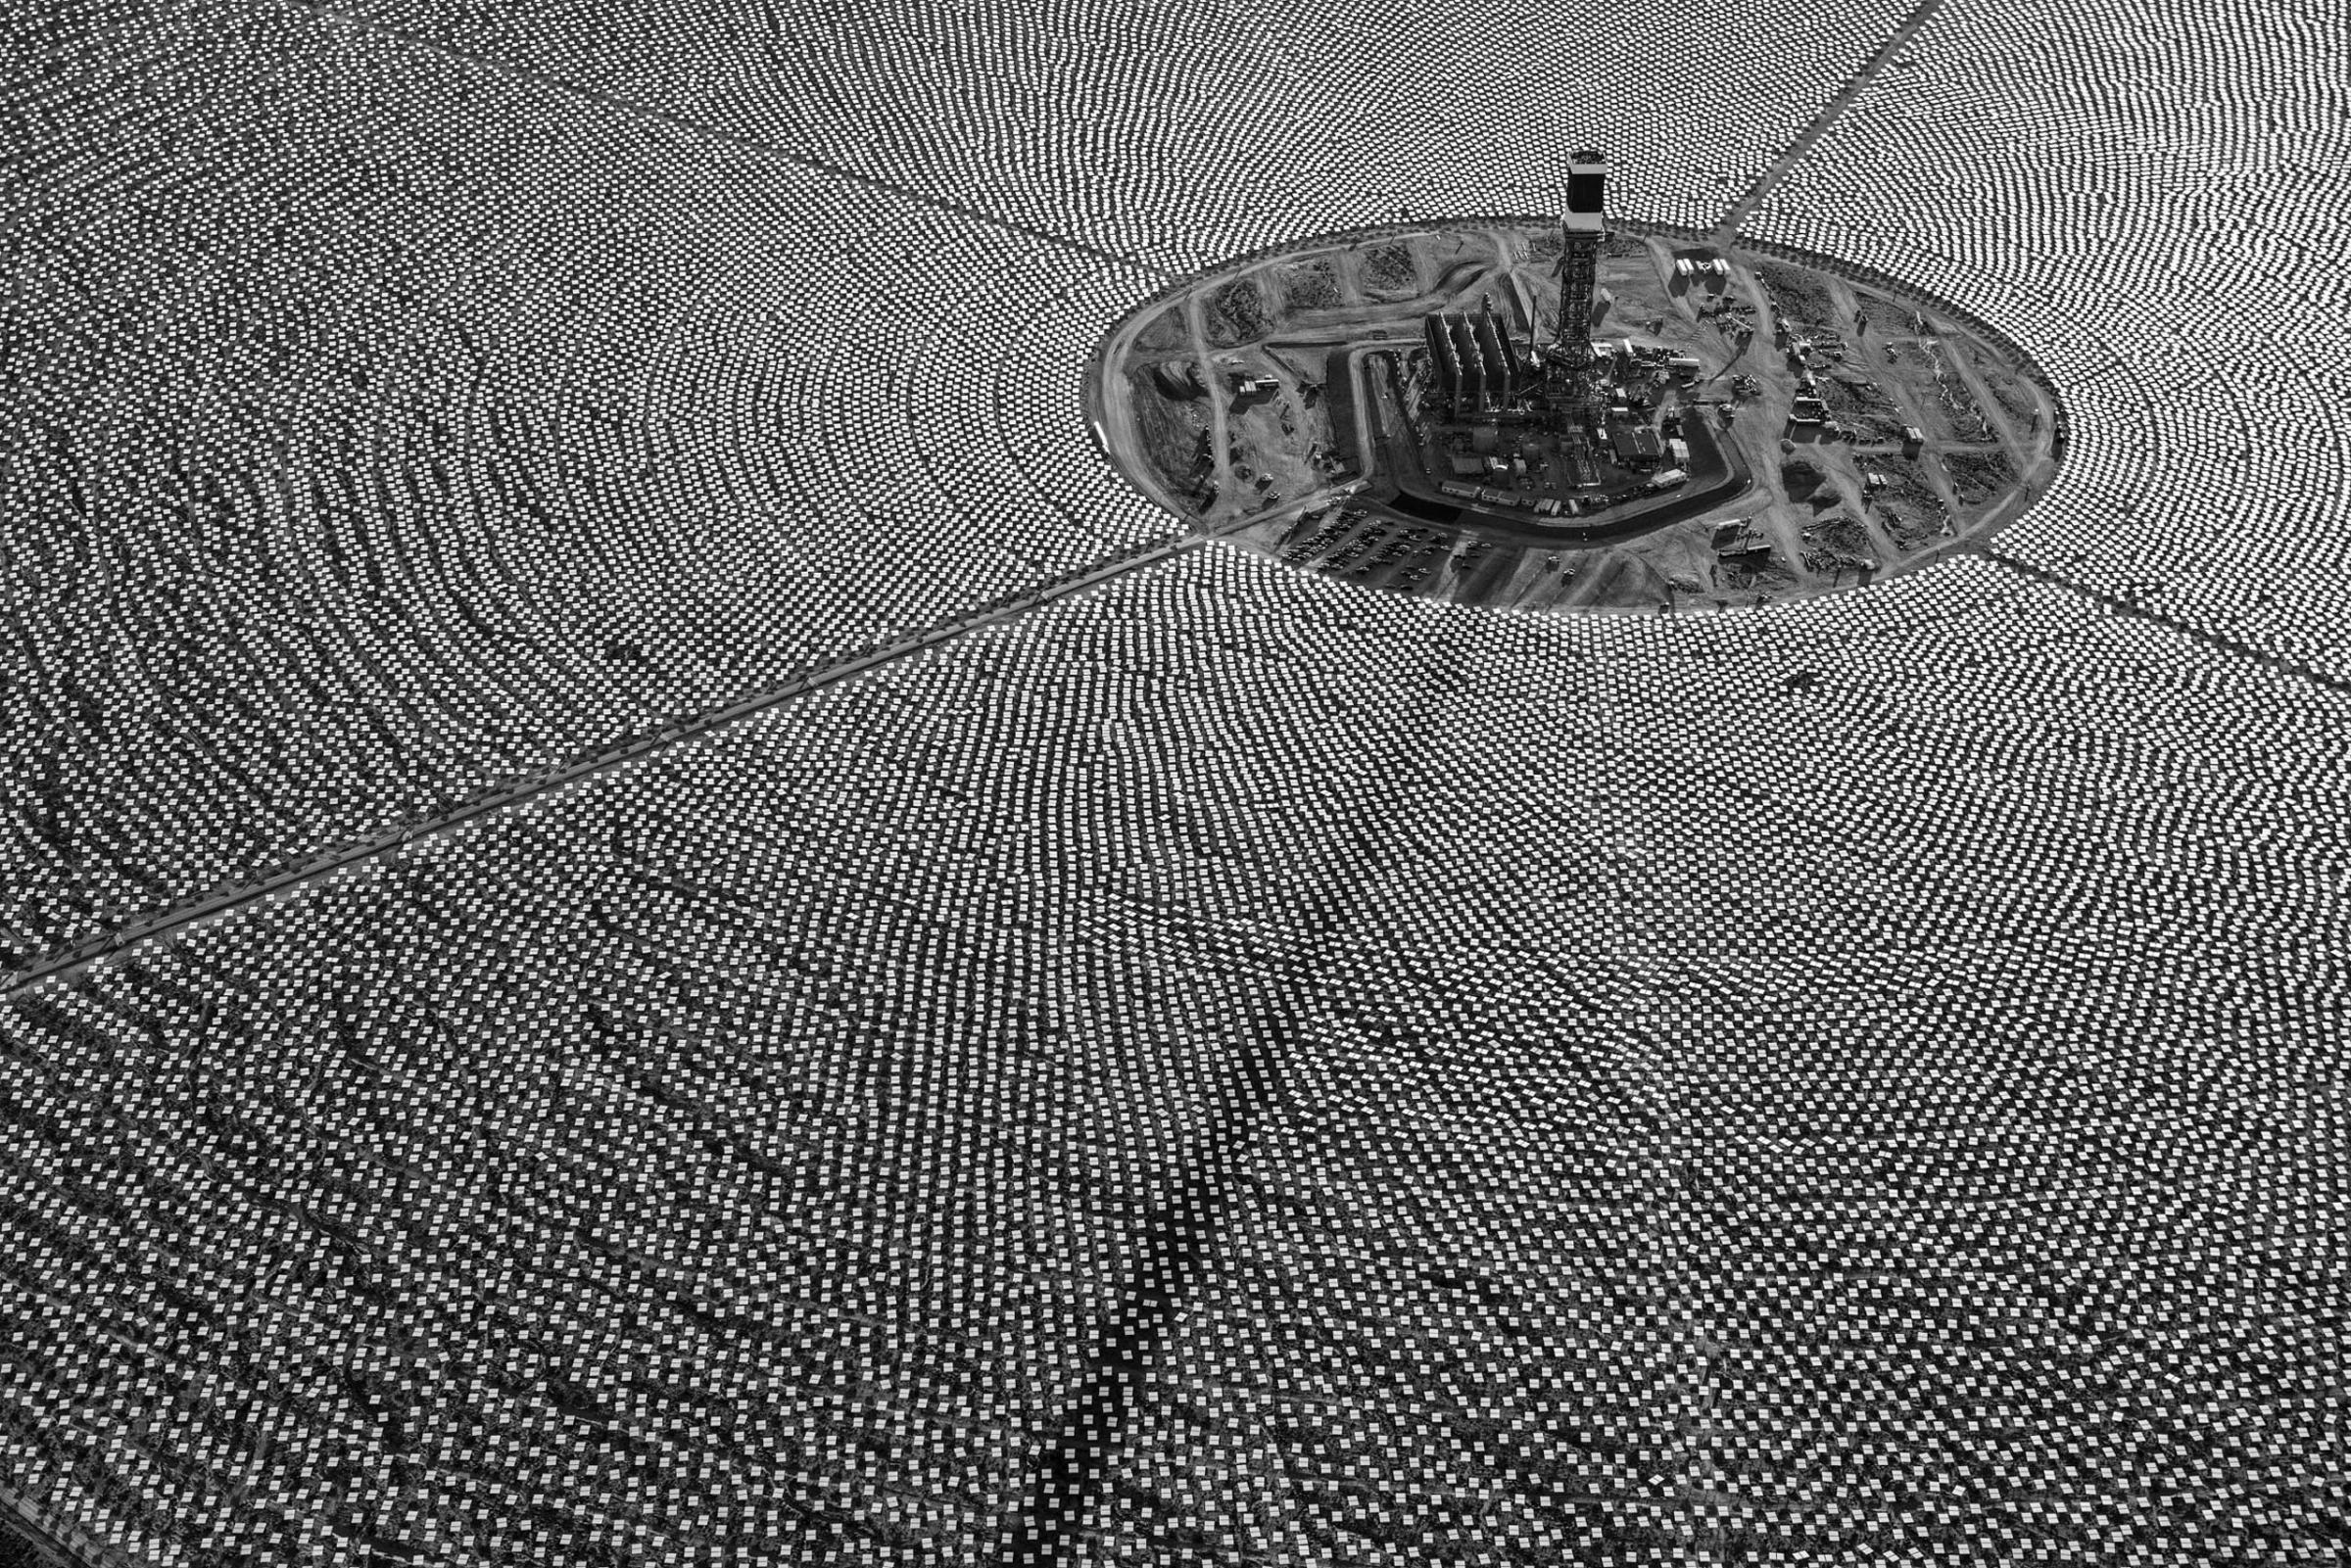 Mirrored Heliostats that reflect and concentrate desert sunshine surround a tower at the Ivanpah Solar power station in the Mojave Desert, California. Jamey Stillings